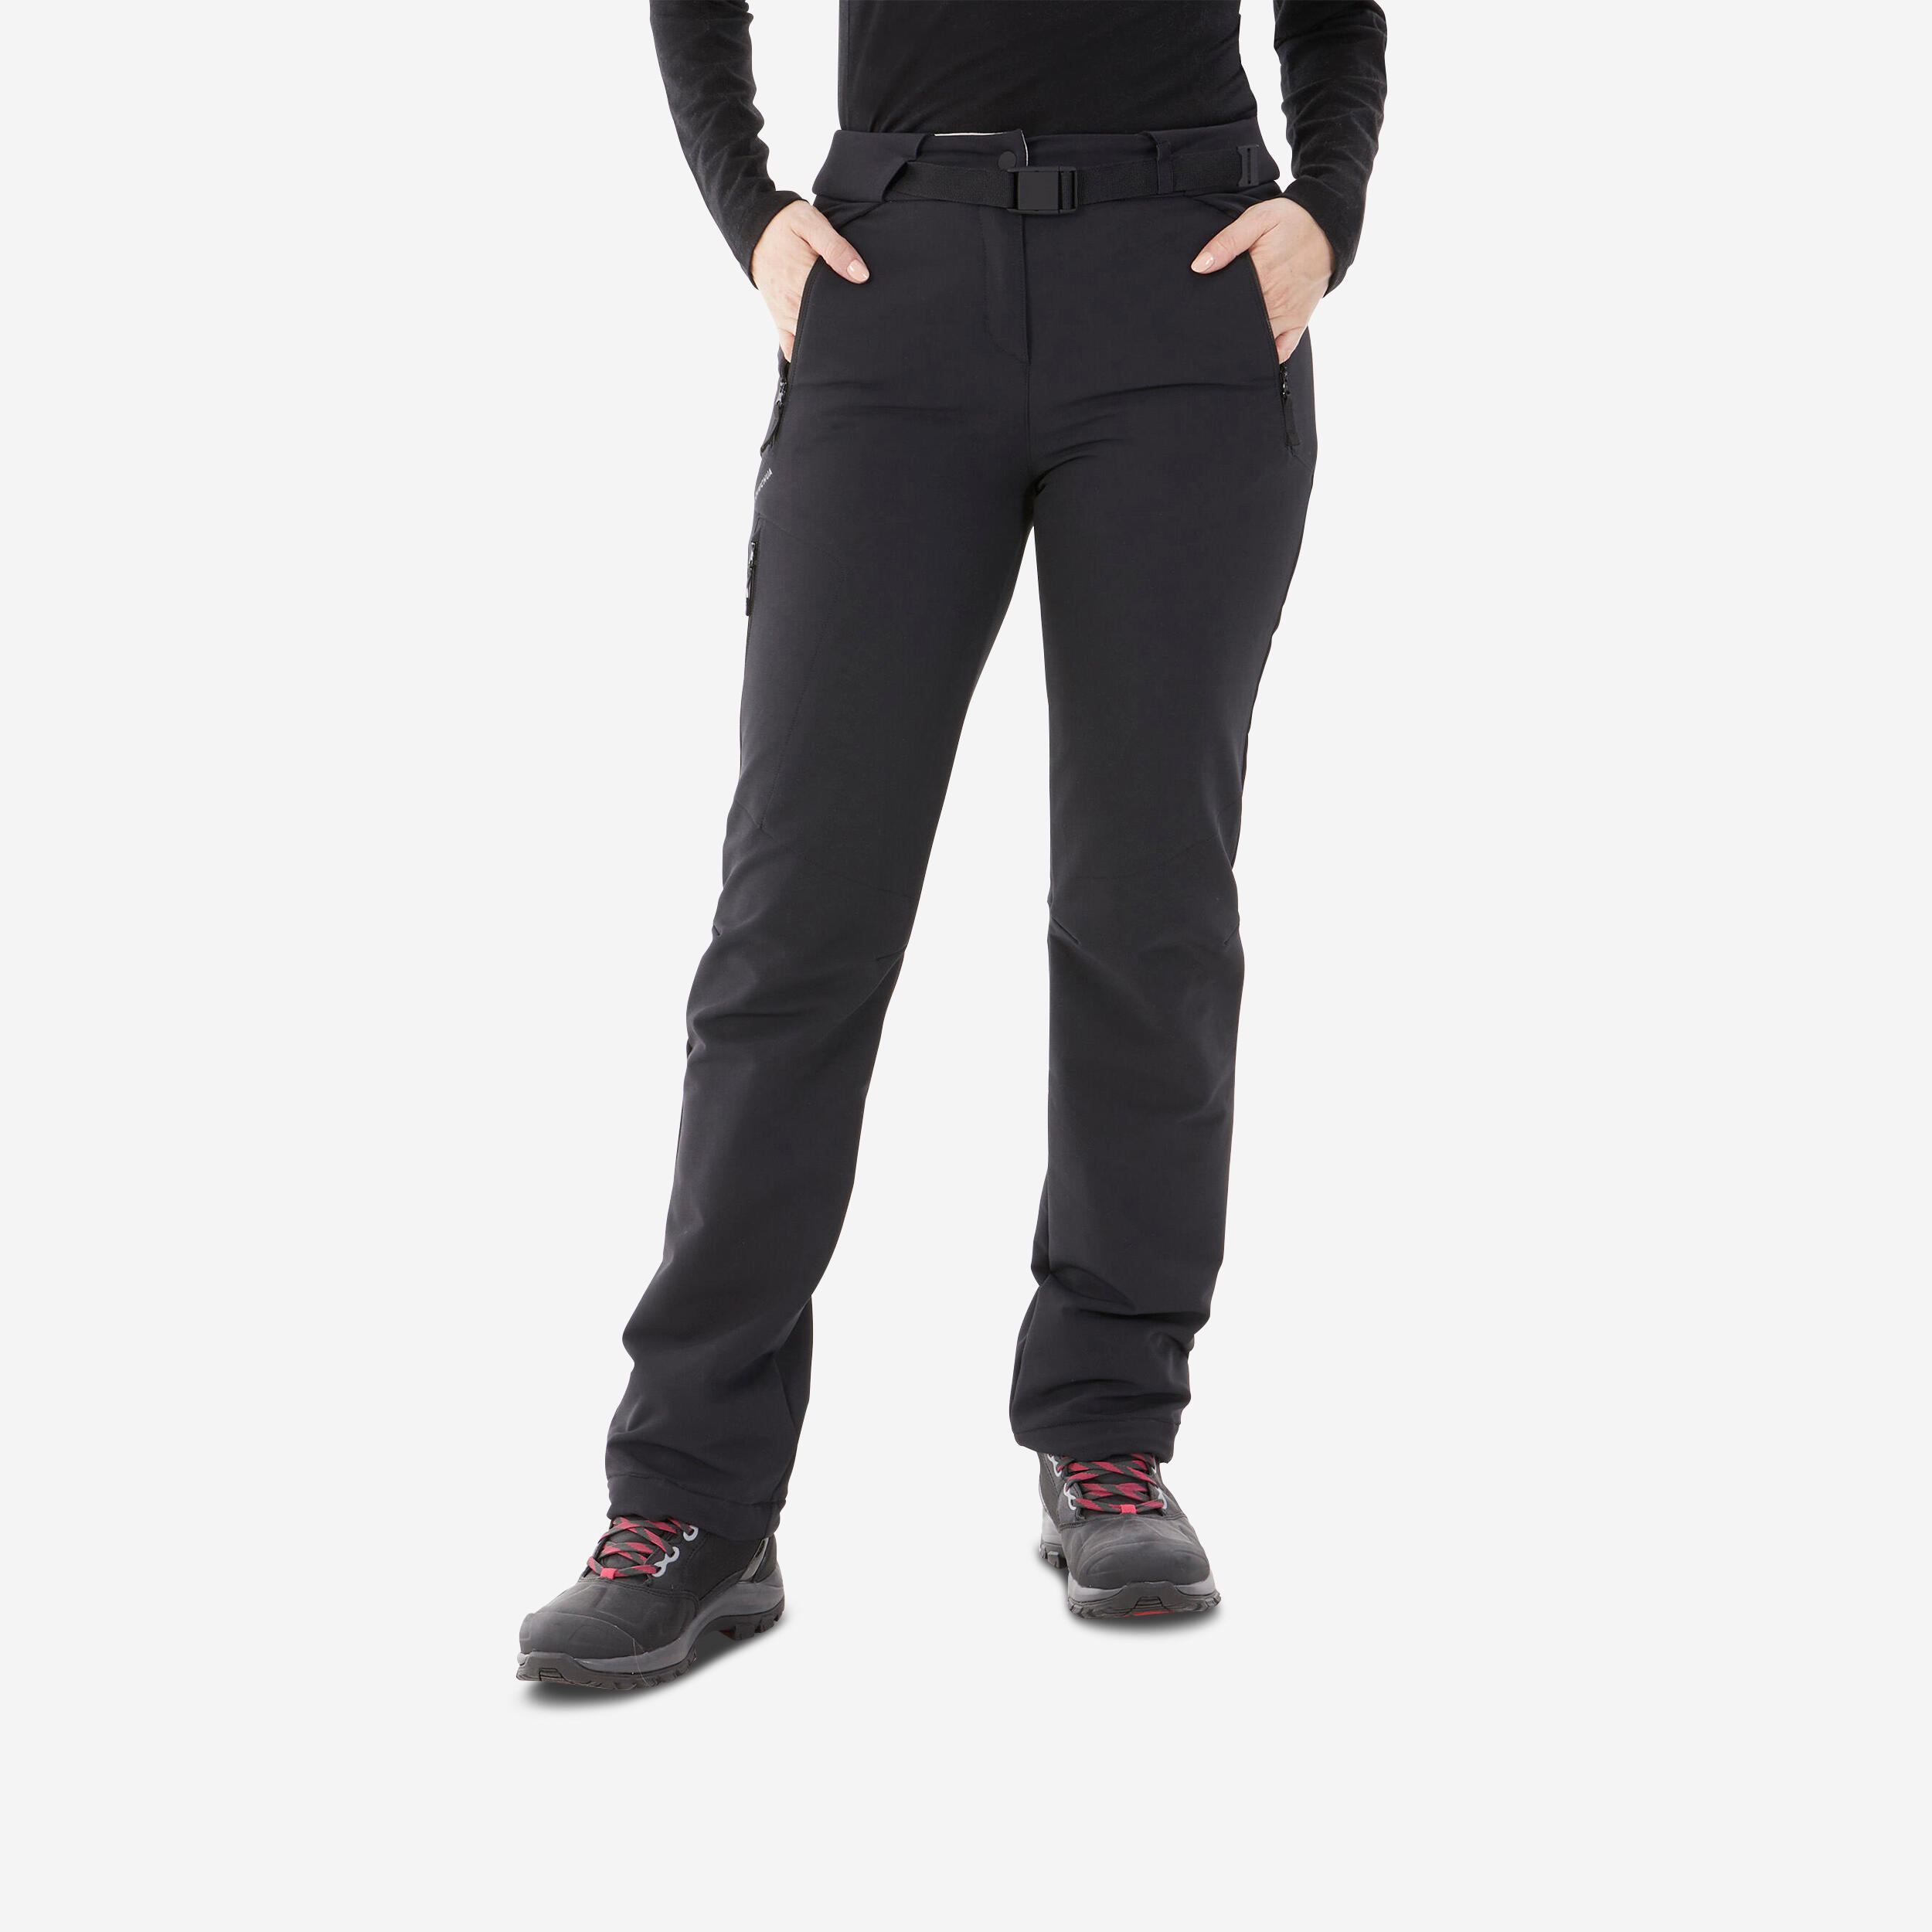 WOMEN'S WARM WATER-REPELLENT SNOW HIKING TROUSERS - SH500 MOUNTAIN 1/17